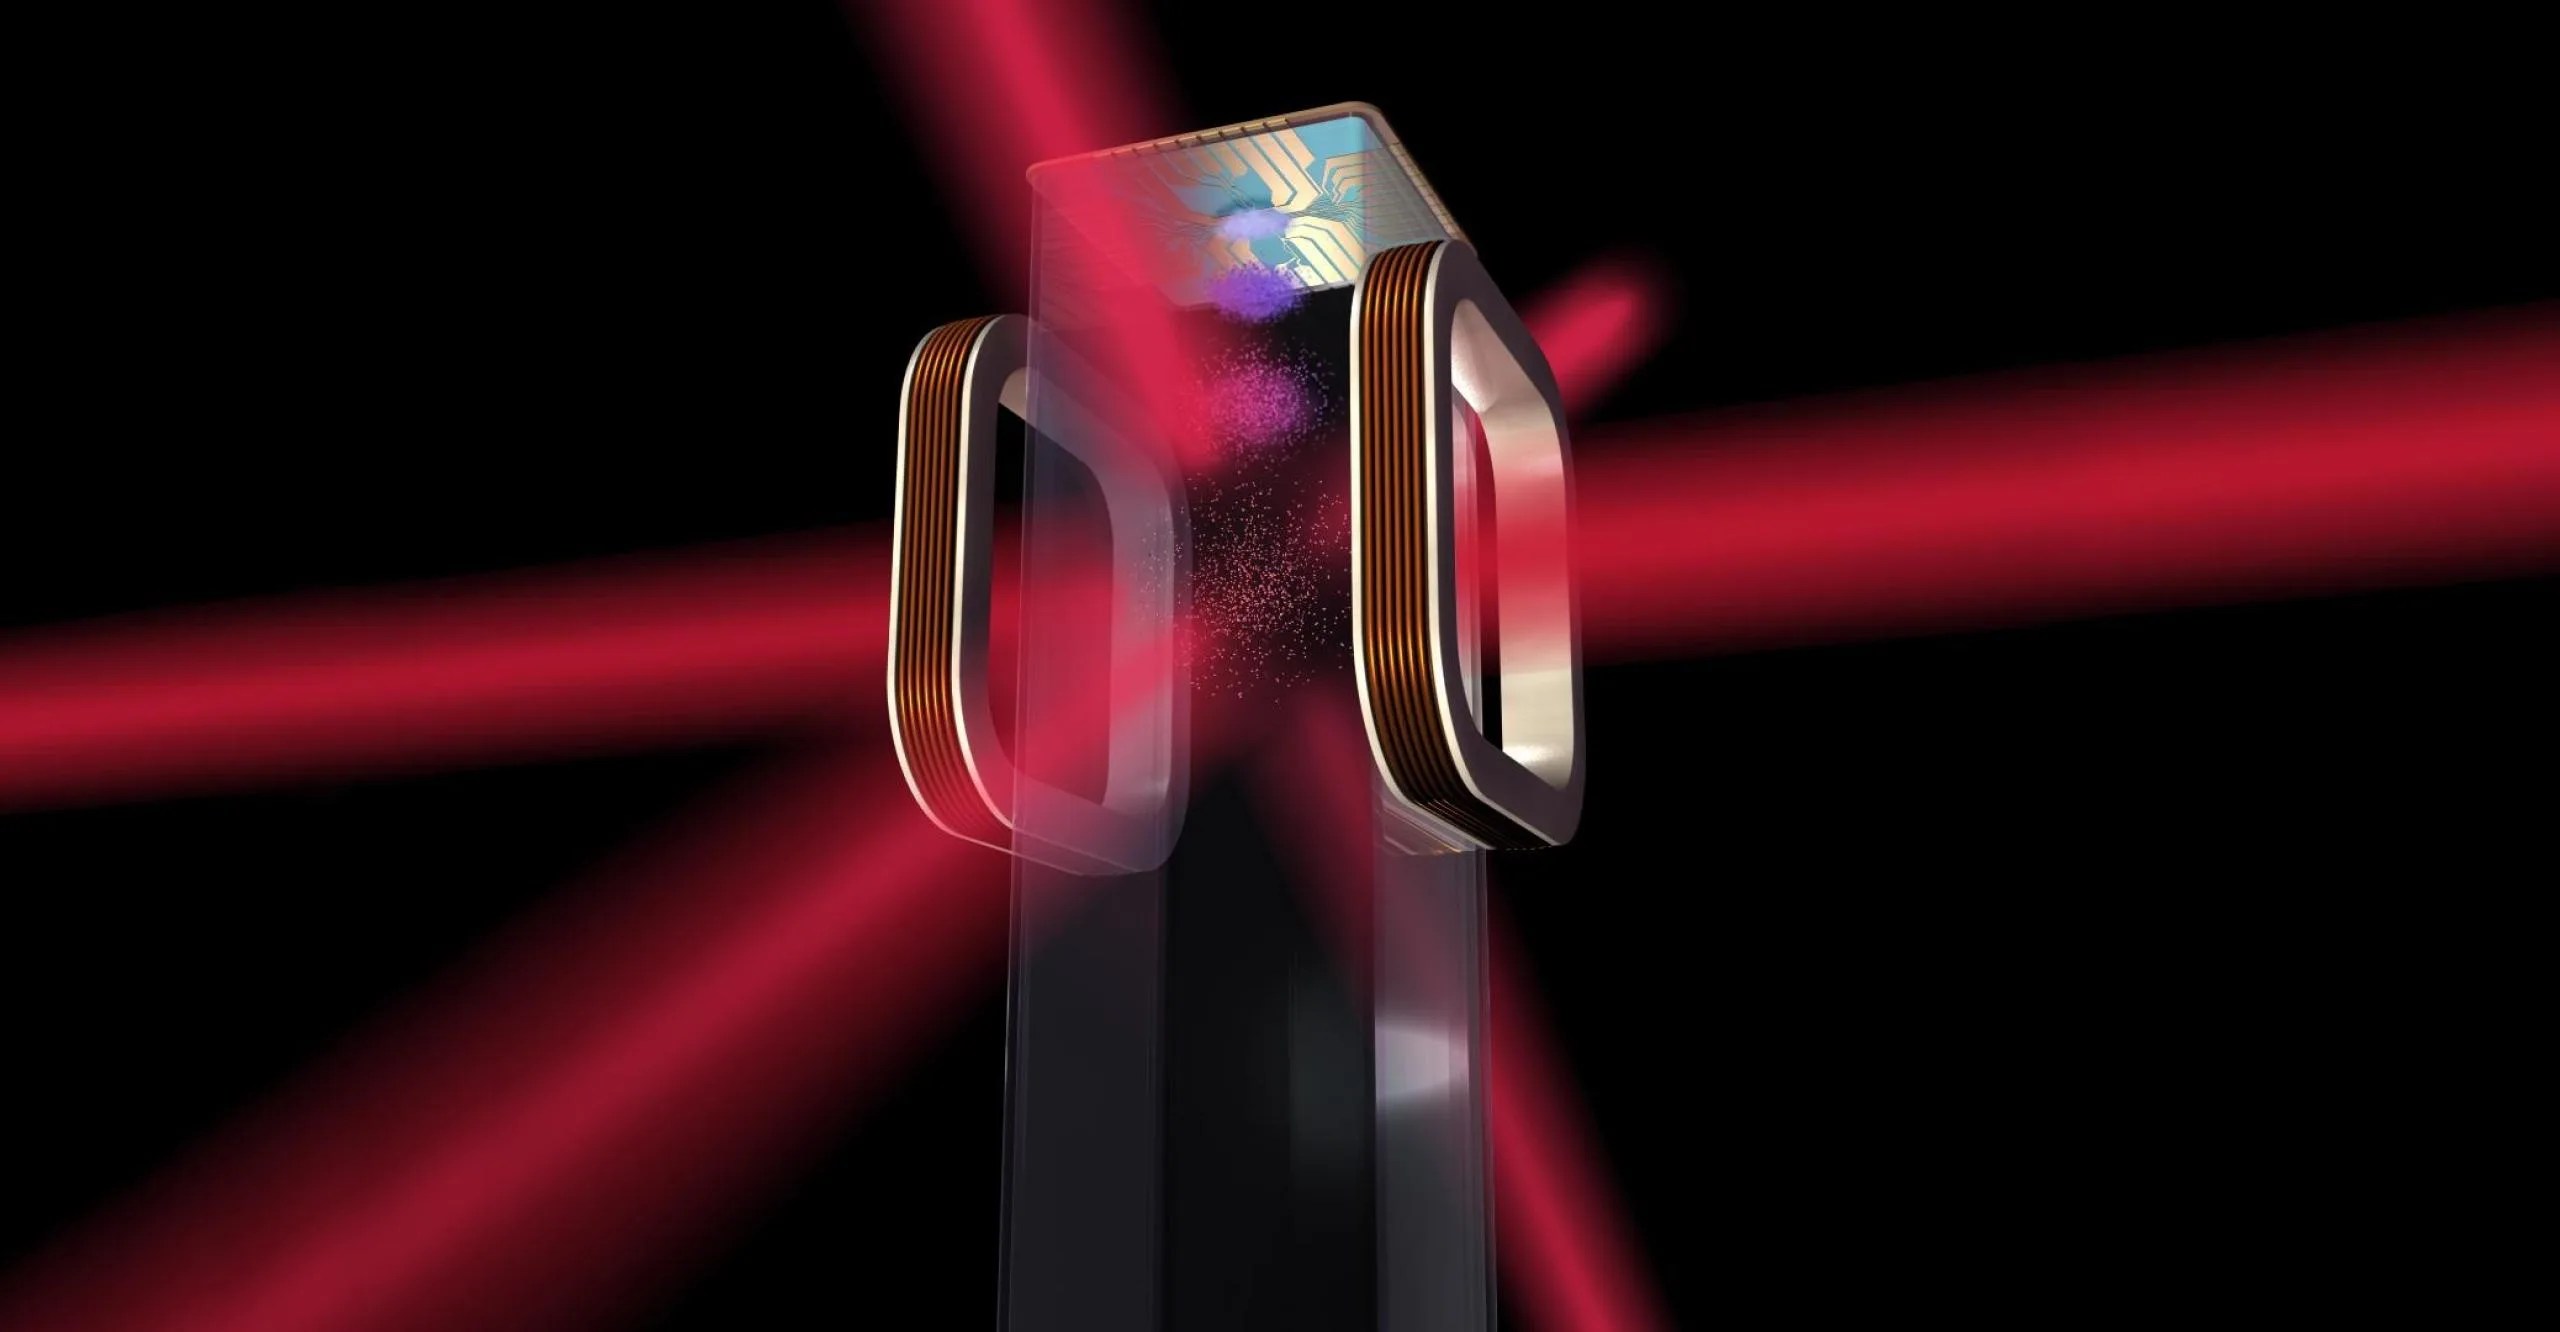 Concept image of a magneto-optical trap and atom chip during experimentation with three laser beams in use.